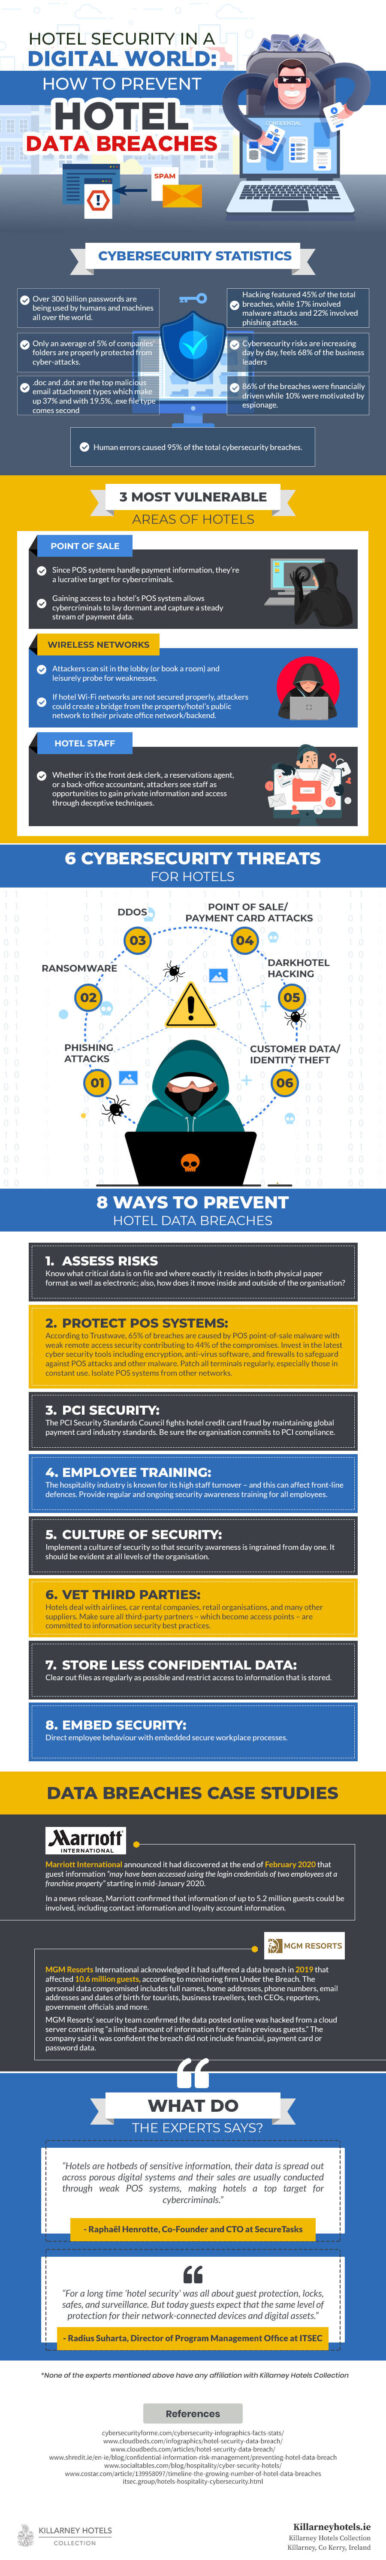 How To Prevent Hotel Data Breaches - infographic